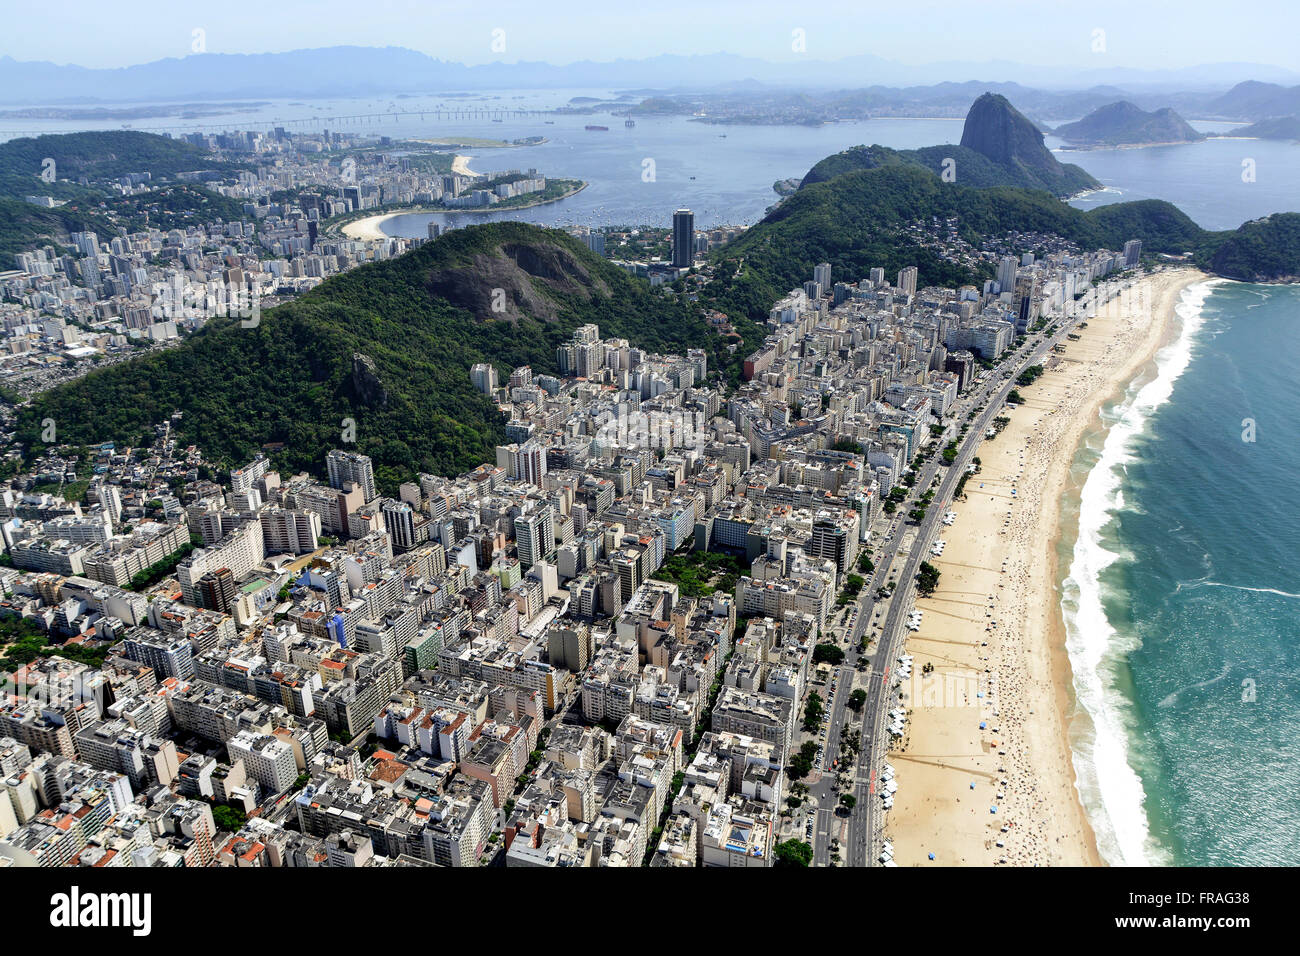 Aerial view of part of the neighborhoods and the beaches of Copacabana and Leme and Avenida Atlantica Stock Photo